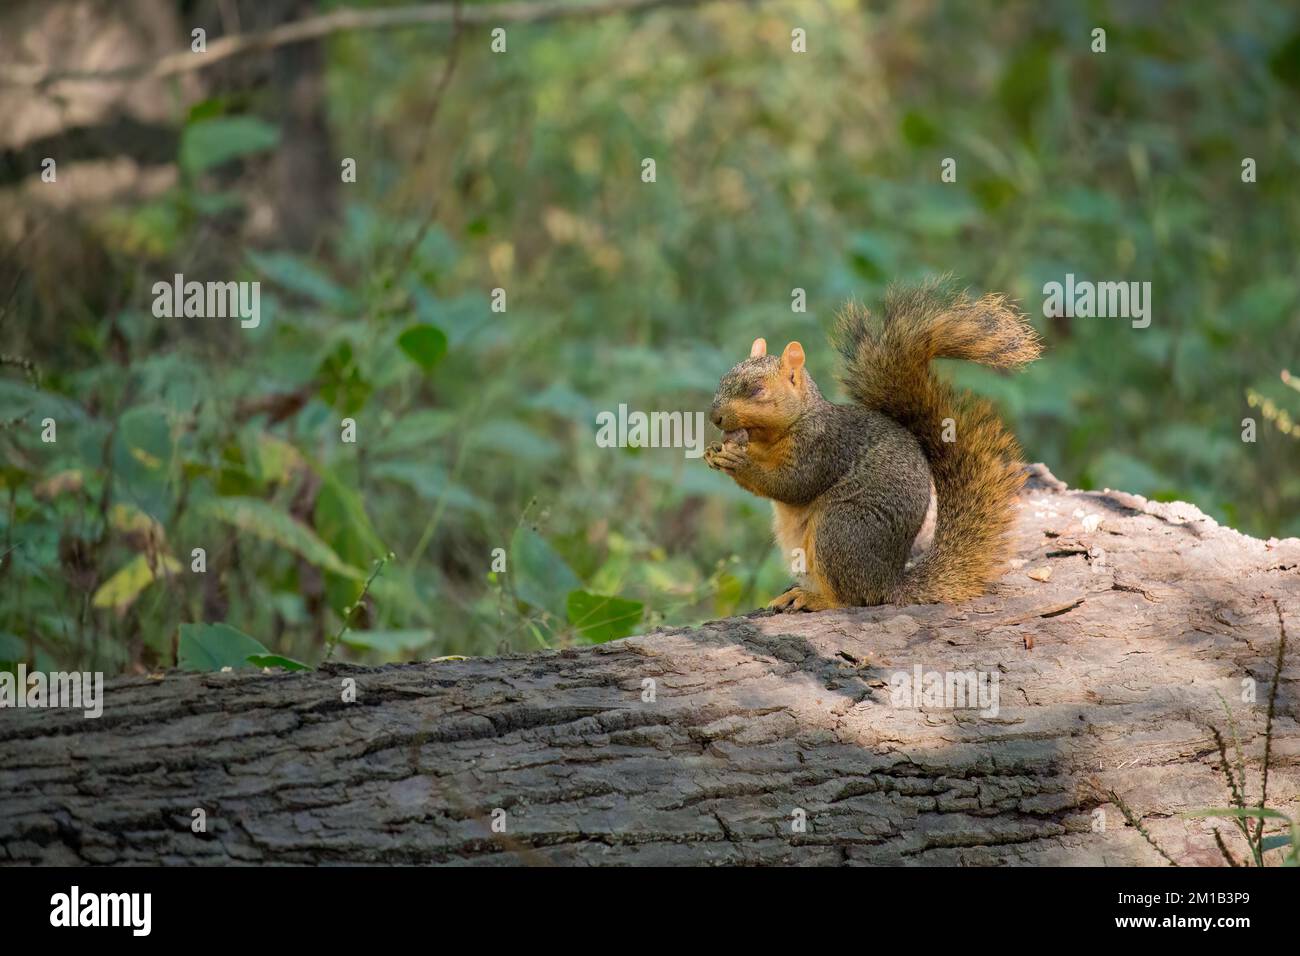 A fox squirrel, blind in its left eye, eats a nut it has found. Its blindness makes it vulnerable to attack from that side. Stock Photo